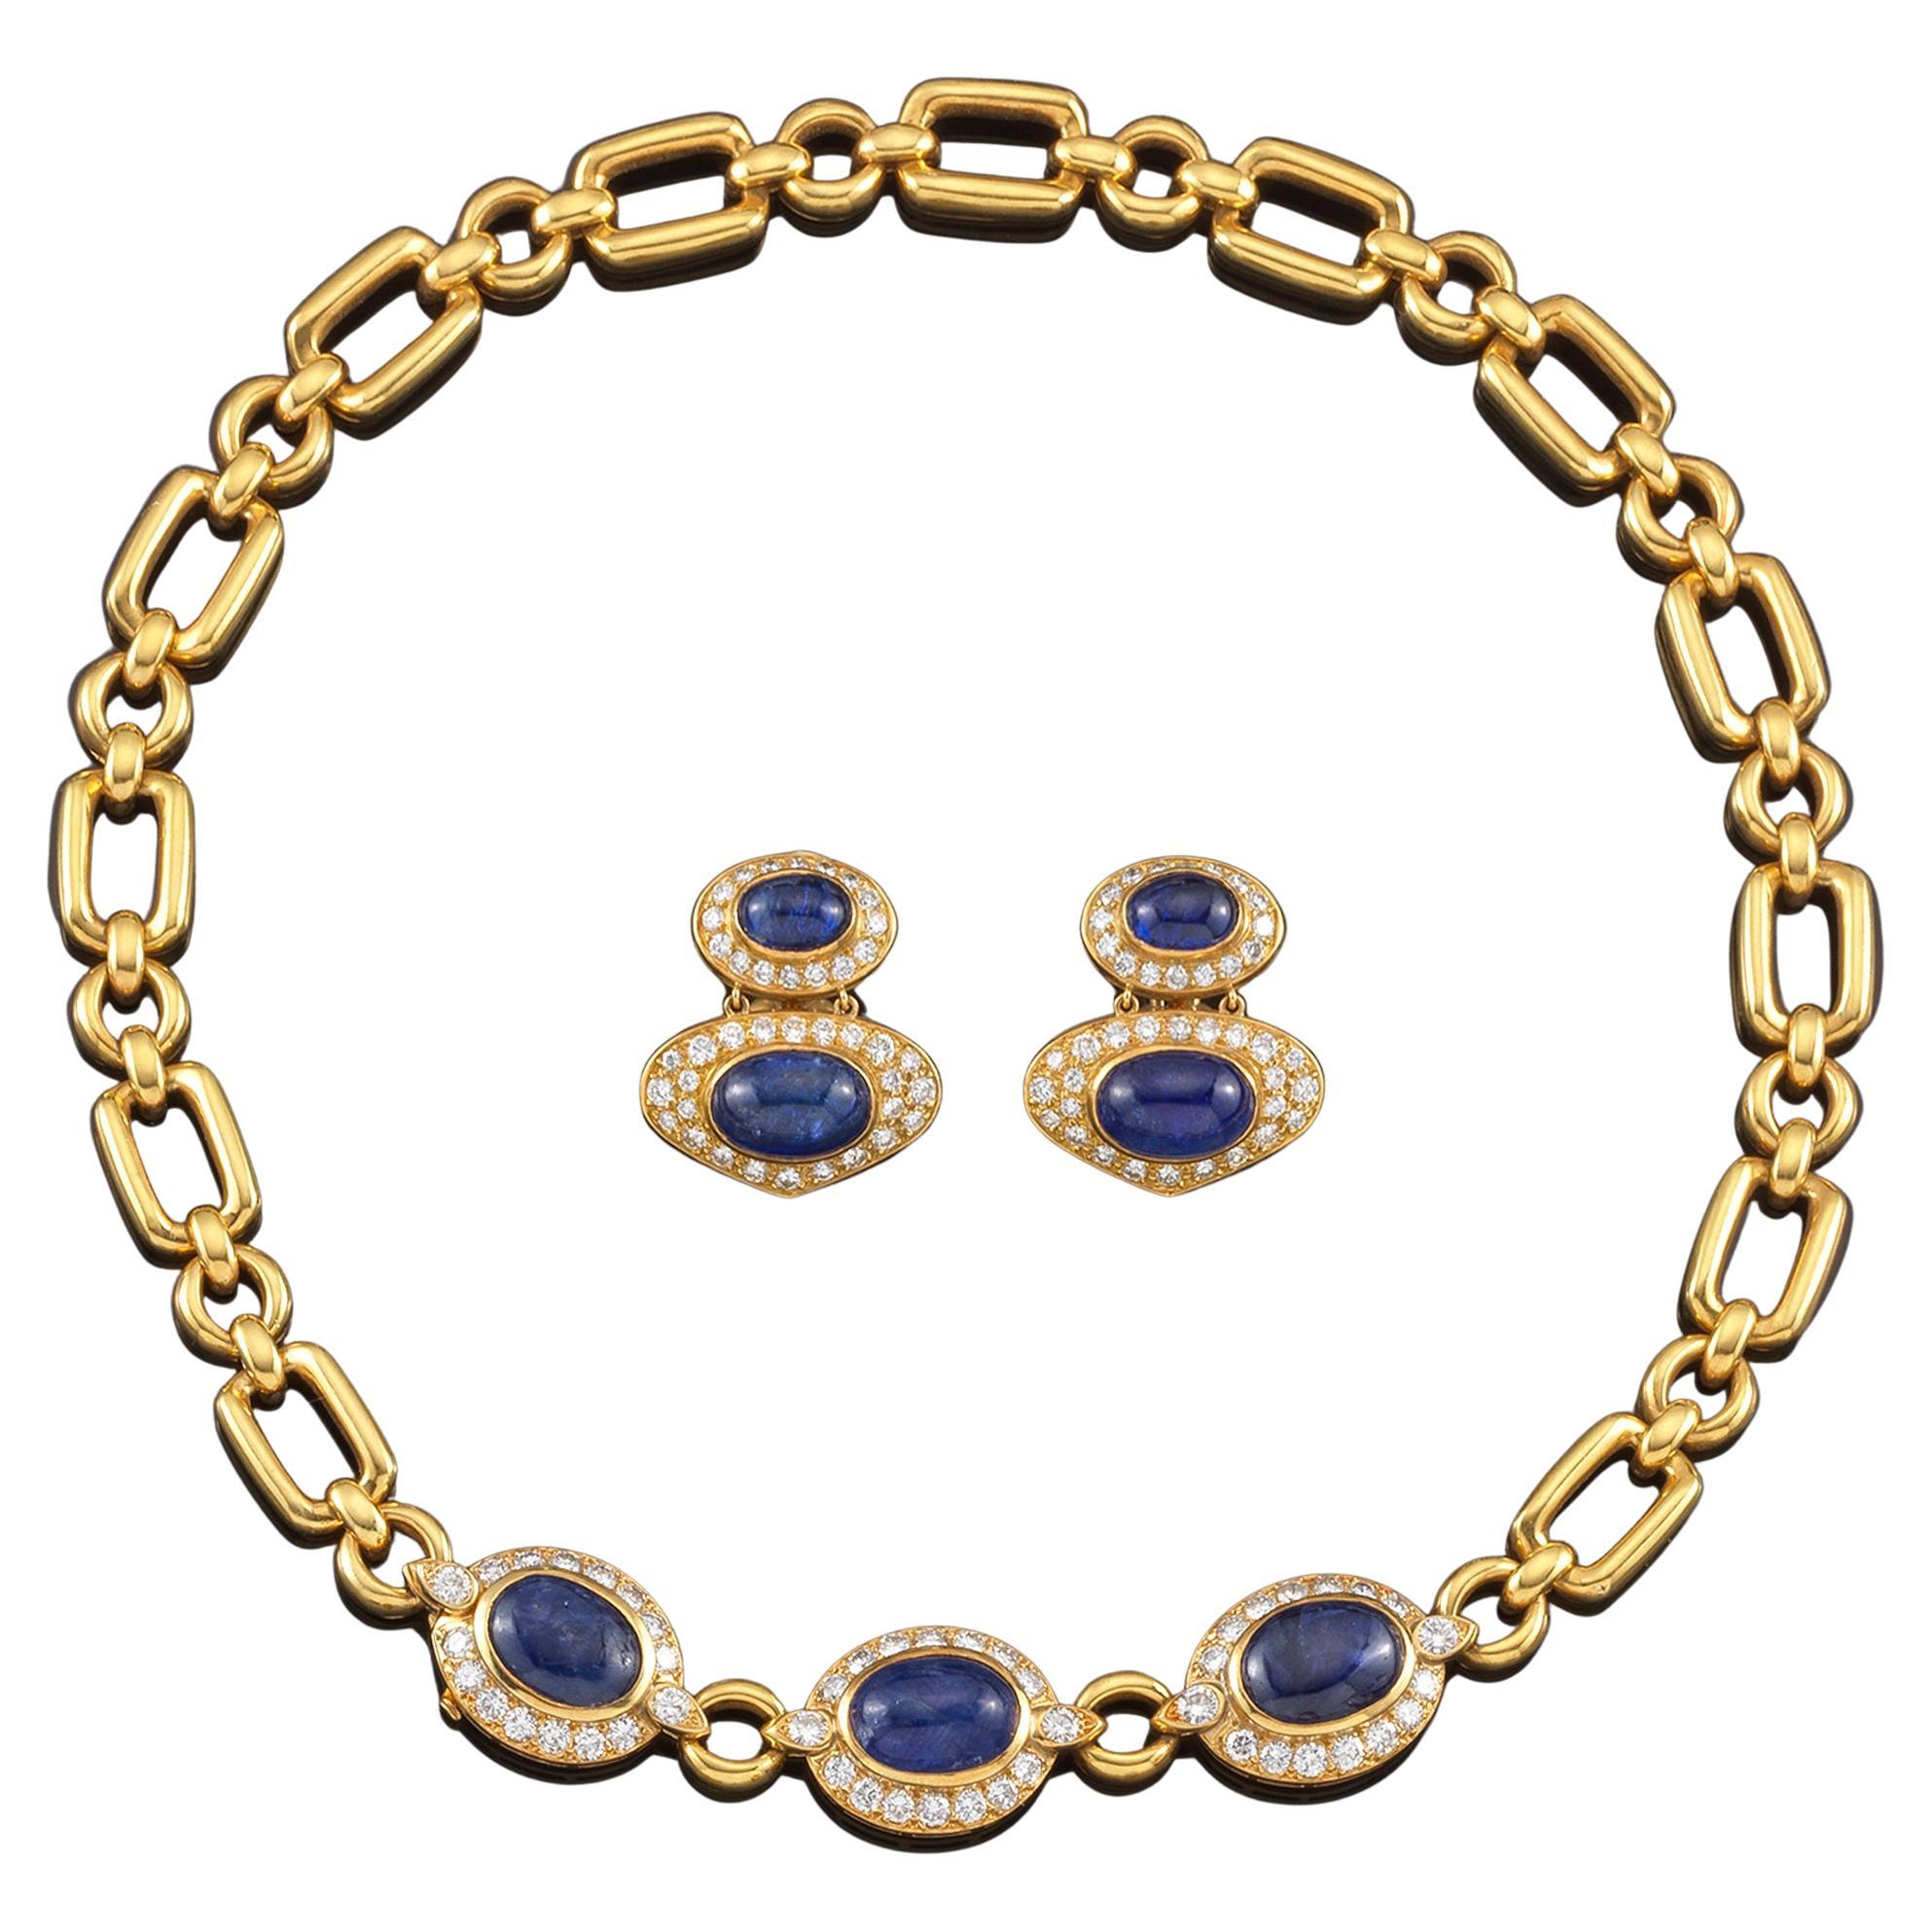 Van Cleef & Arpels Saphire Diamonds  and Yellow Gold Necklace and Earring Parure